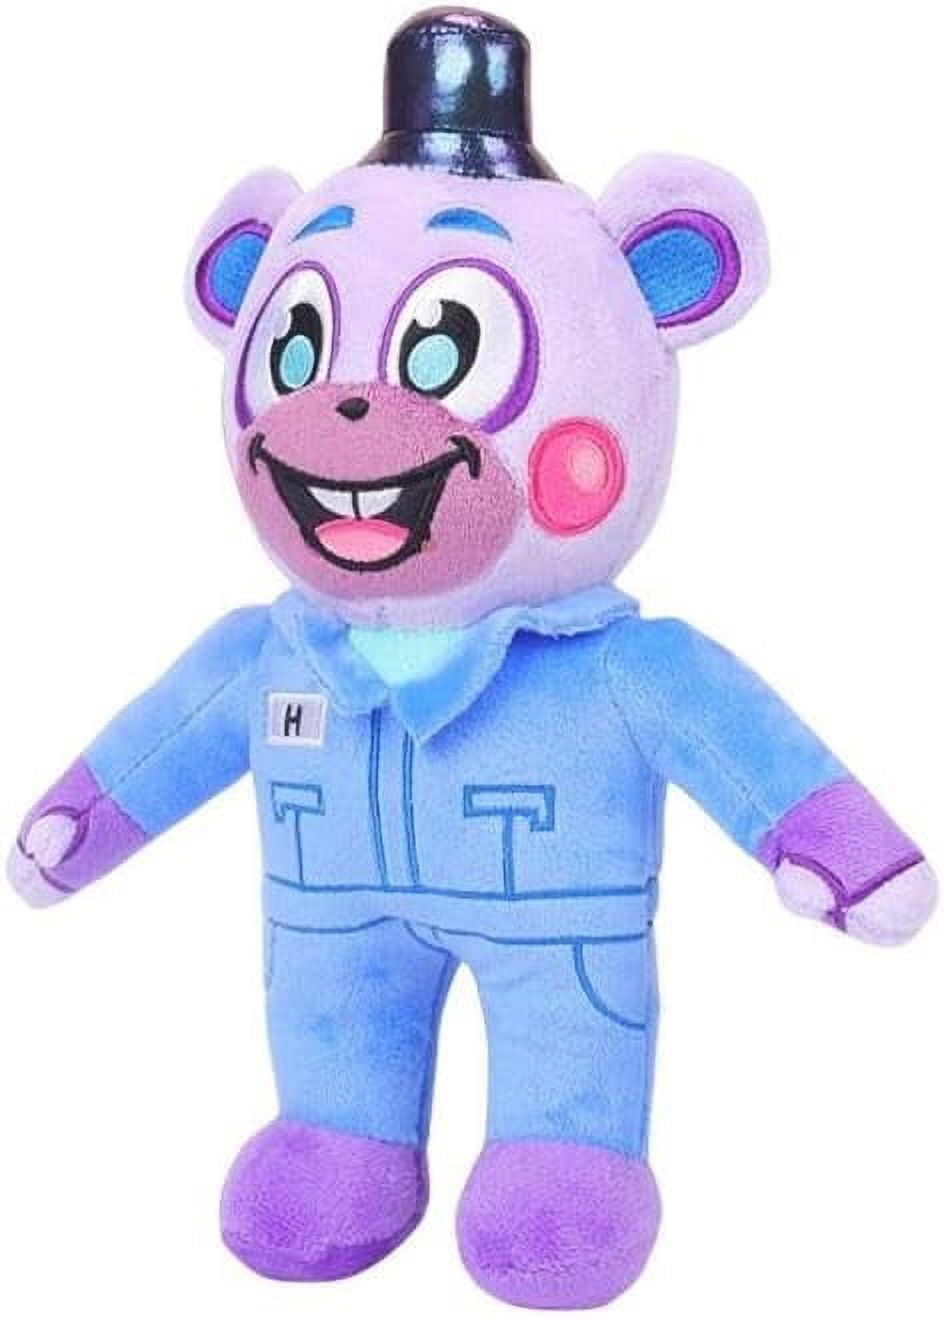 2023 FNAF Security Breach Ruin Plush - 10.2 Helpi Plushies Toy for Game  Fans Gift - Collectible Cute Stuffed Animal Doll for Kids and Adults 